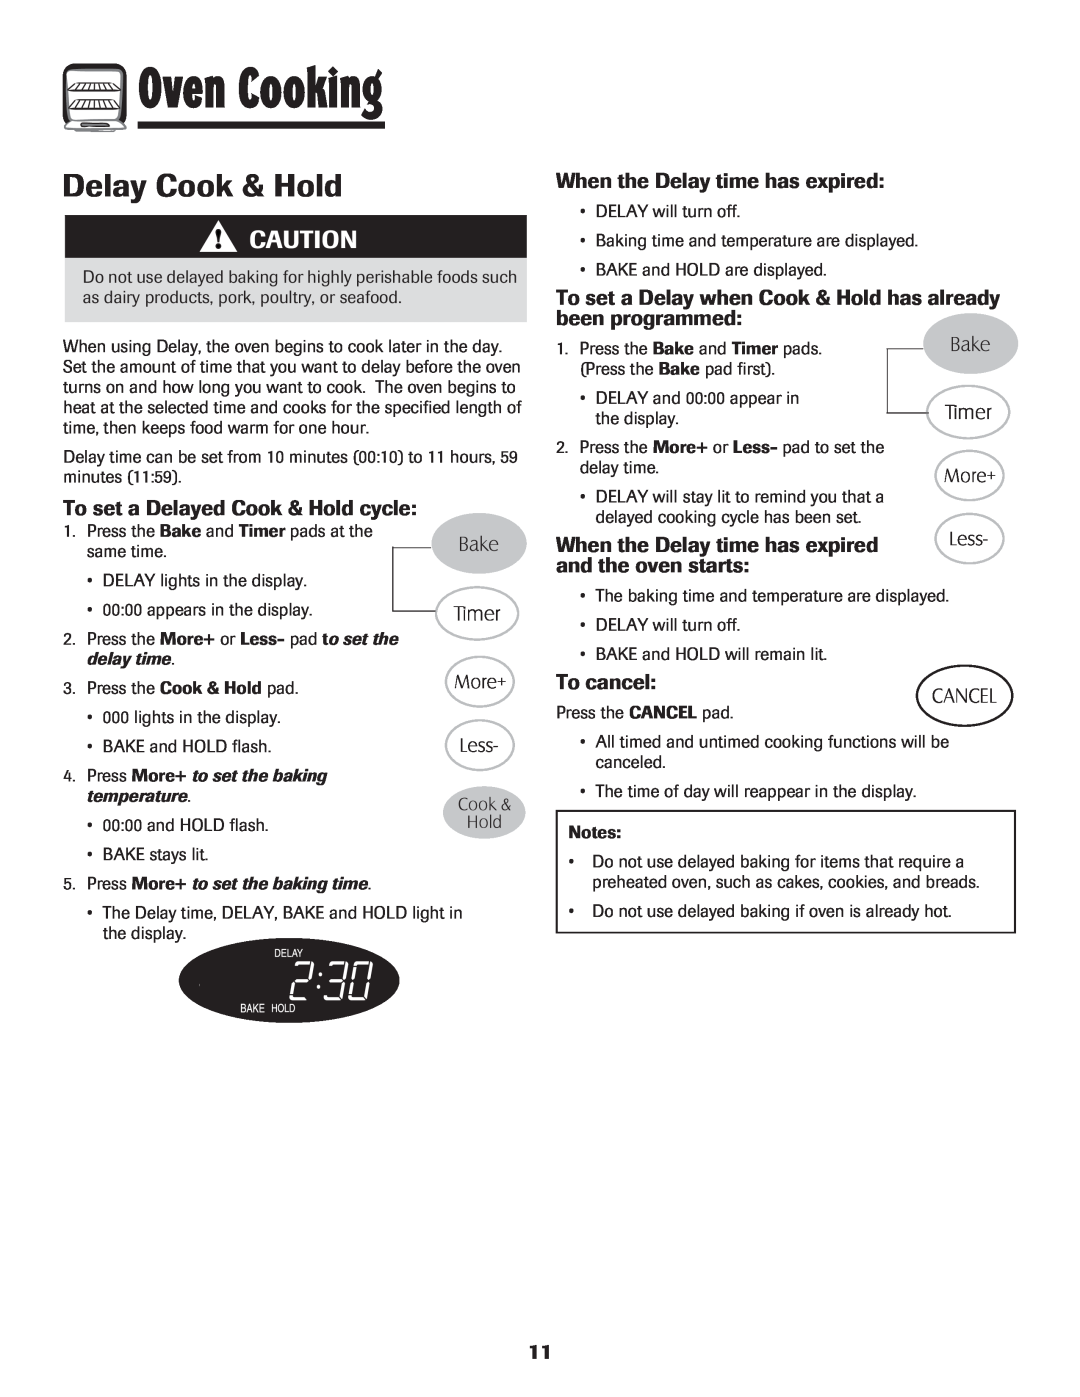 Maytag Range Delay Cook & Hold, To set a Delayed Cook & Hold cycle, When the Delay time has expired, To cancel 